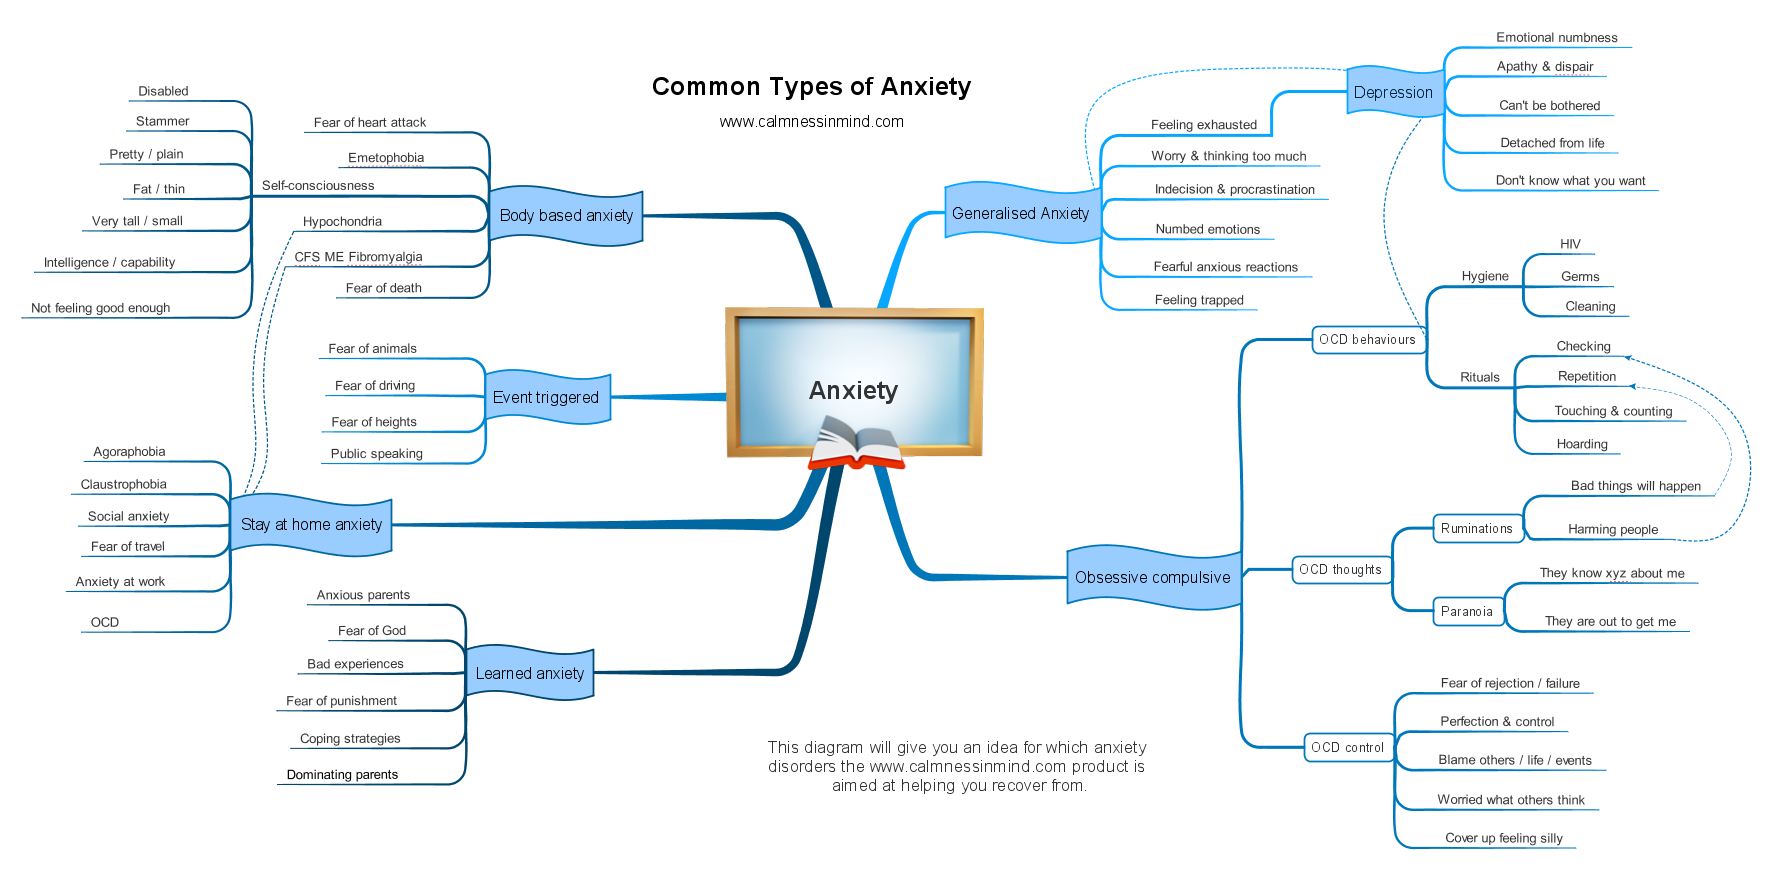 common-types-of-anxiety-disorder